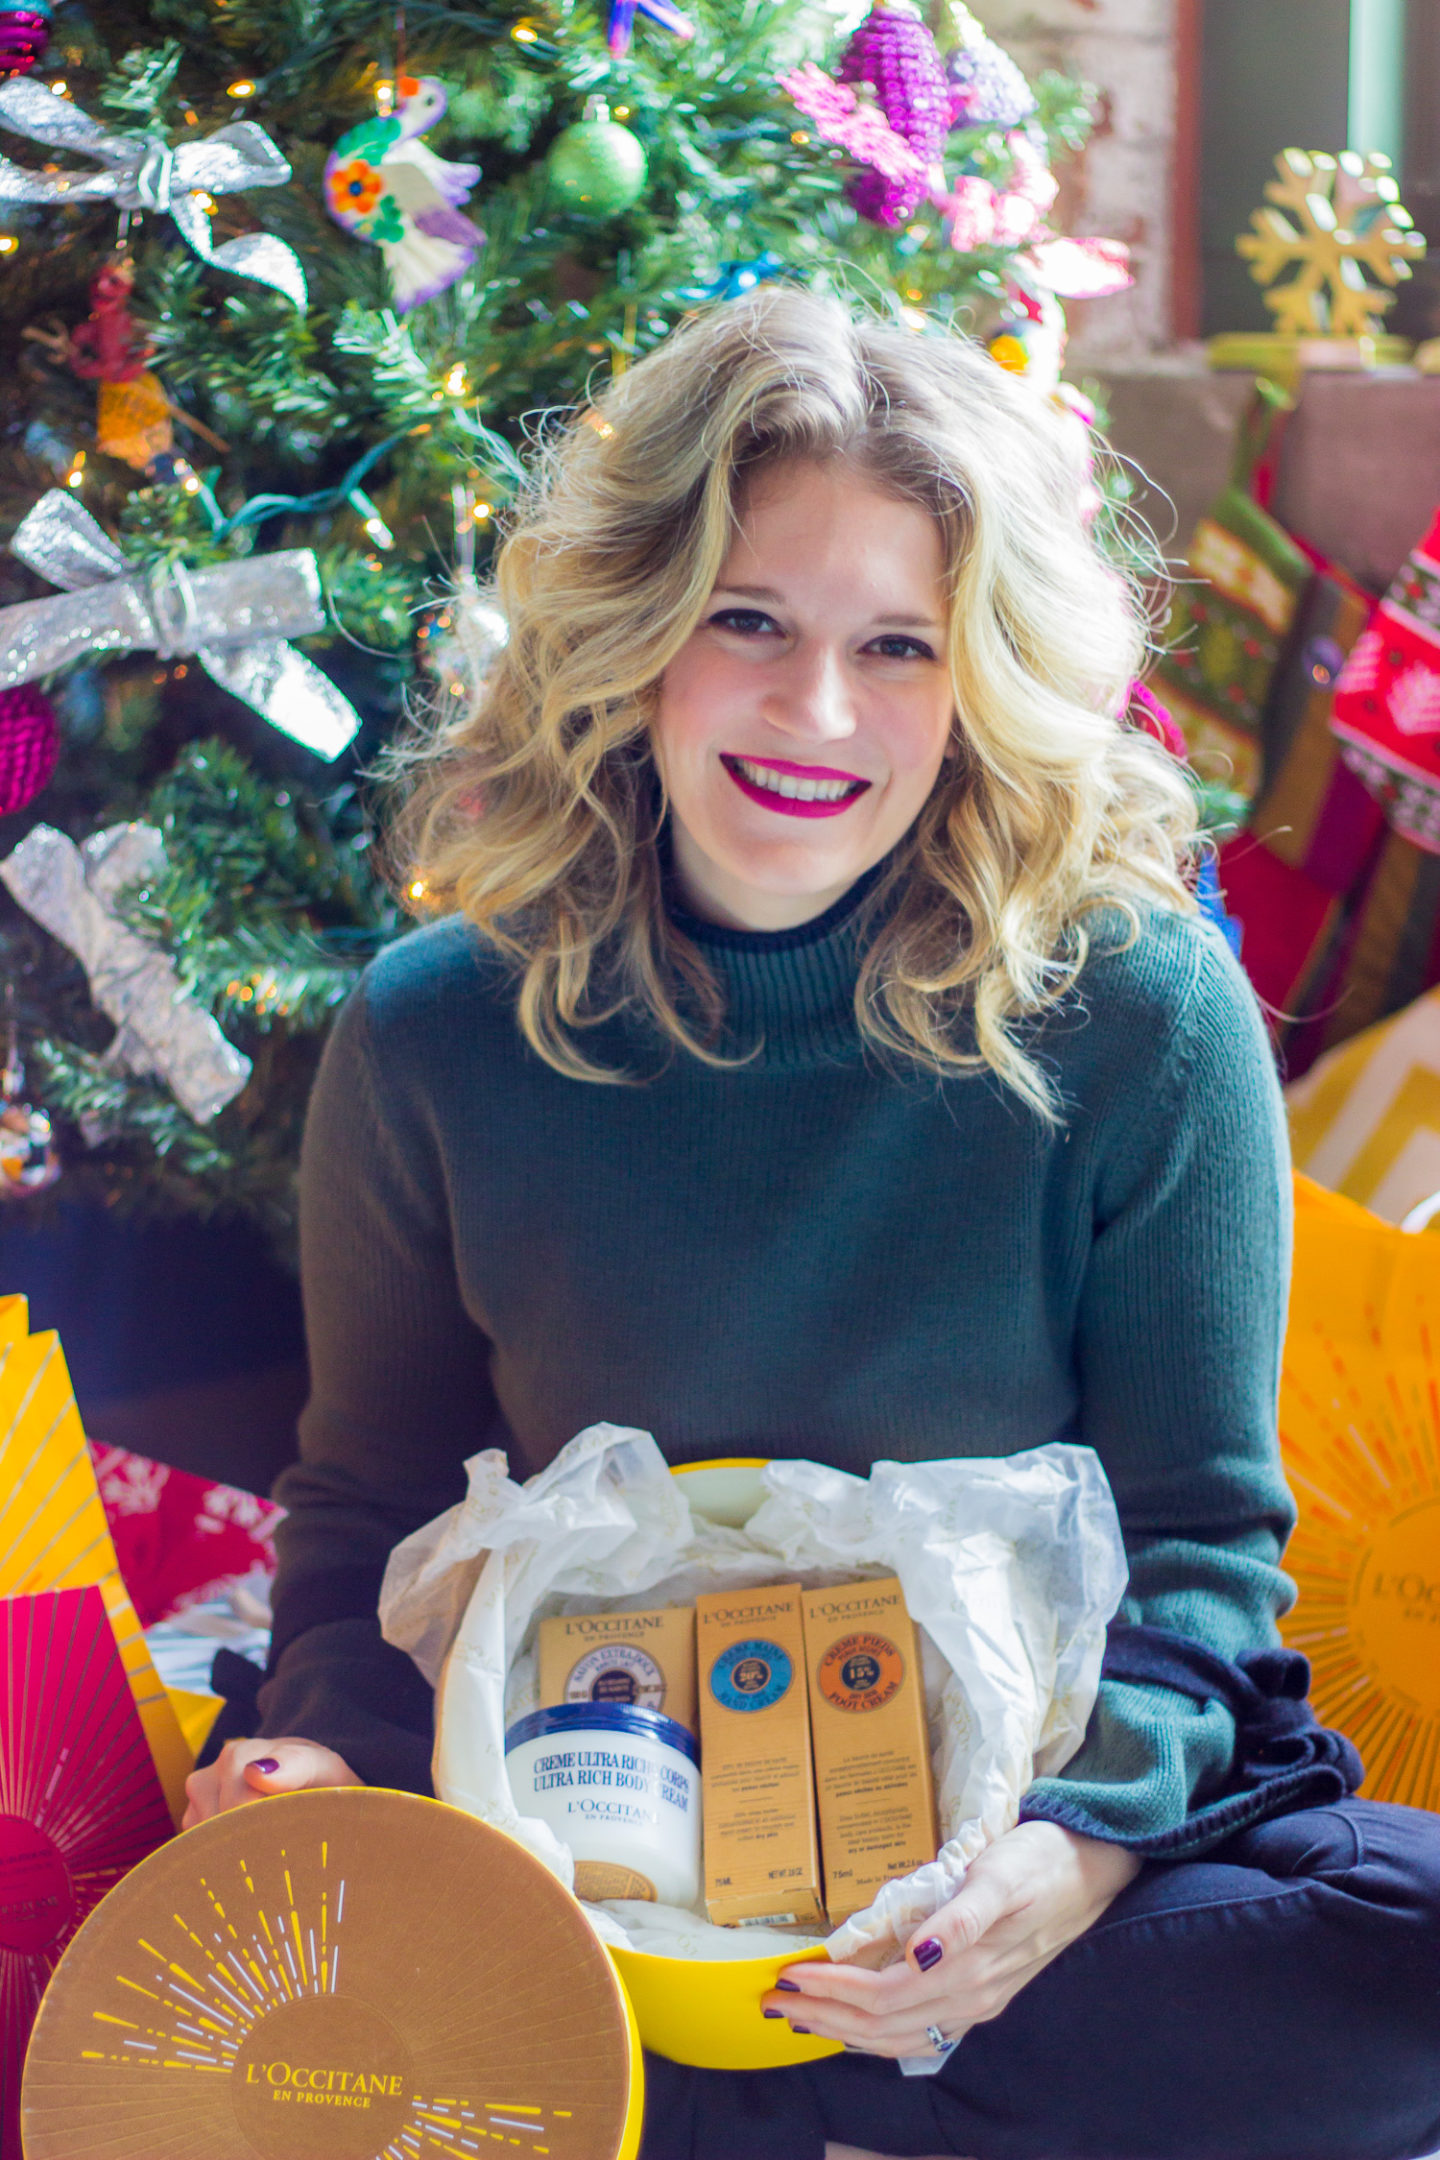 HOLIDAY GIFTS THAT GIVE BACK FROM L'OCCITANE